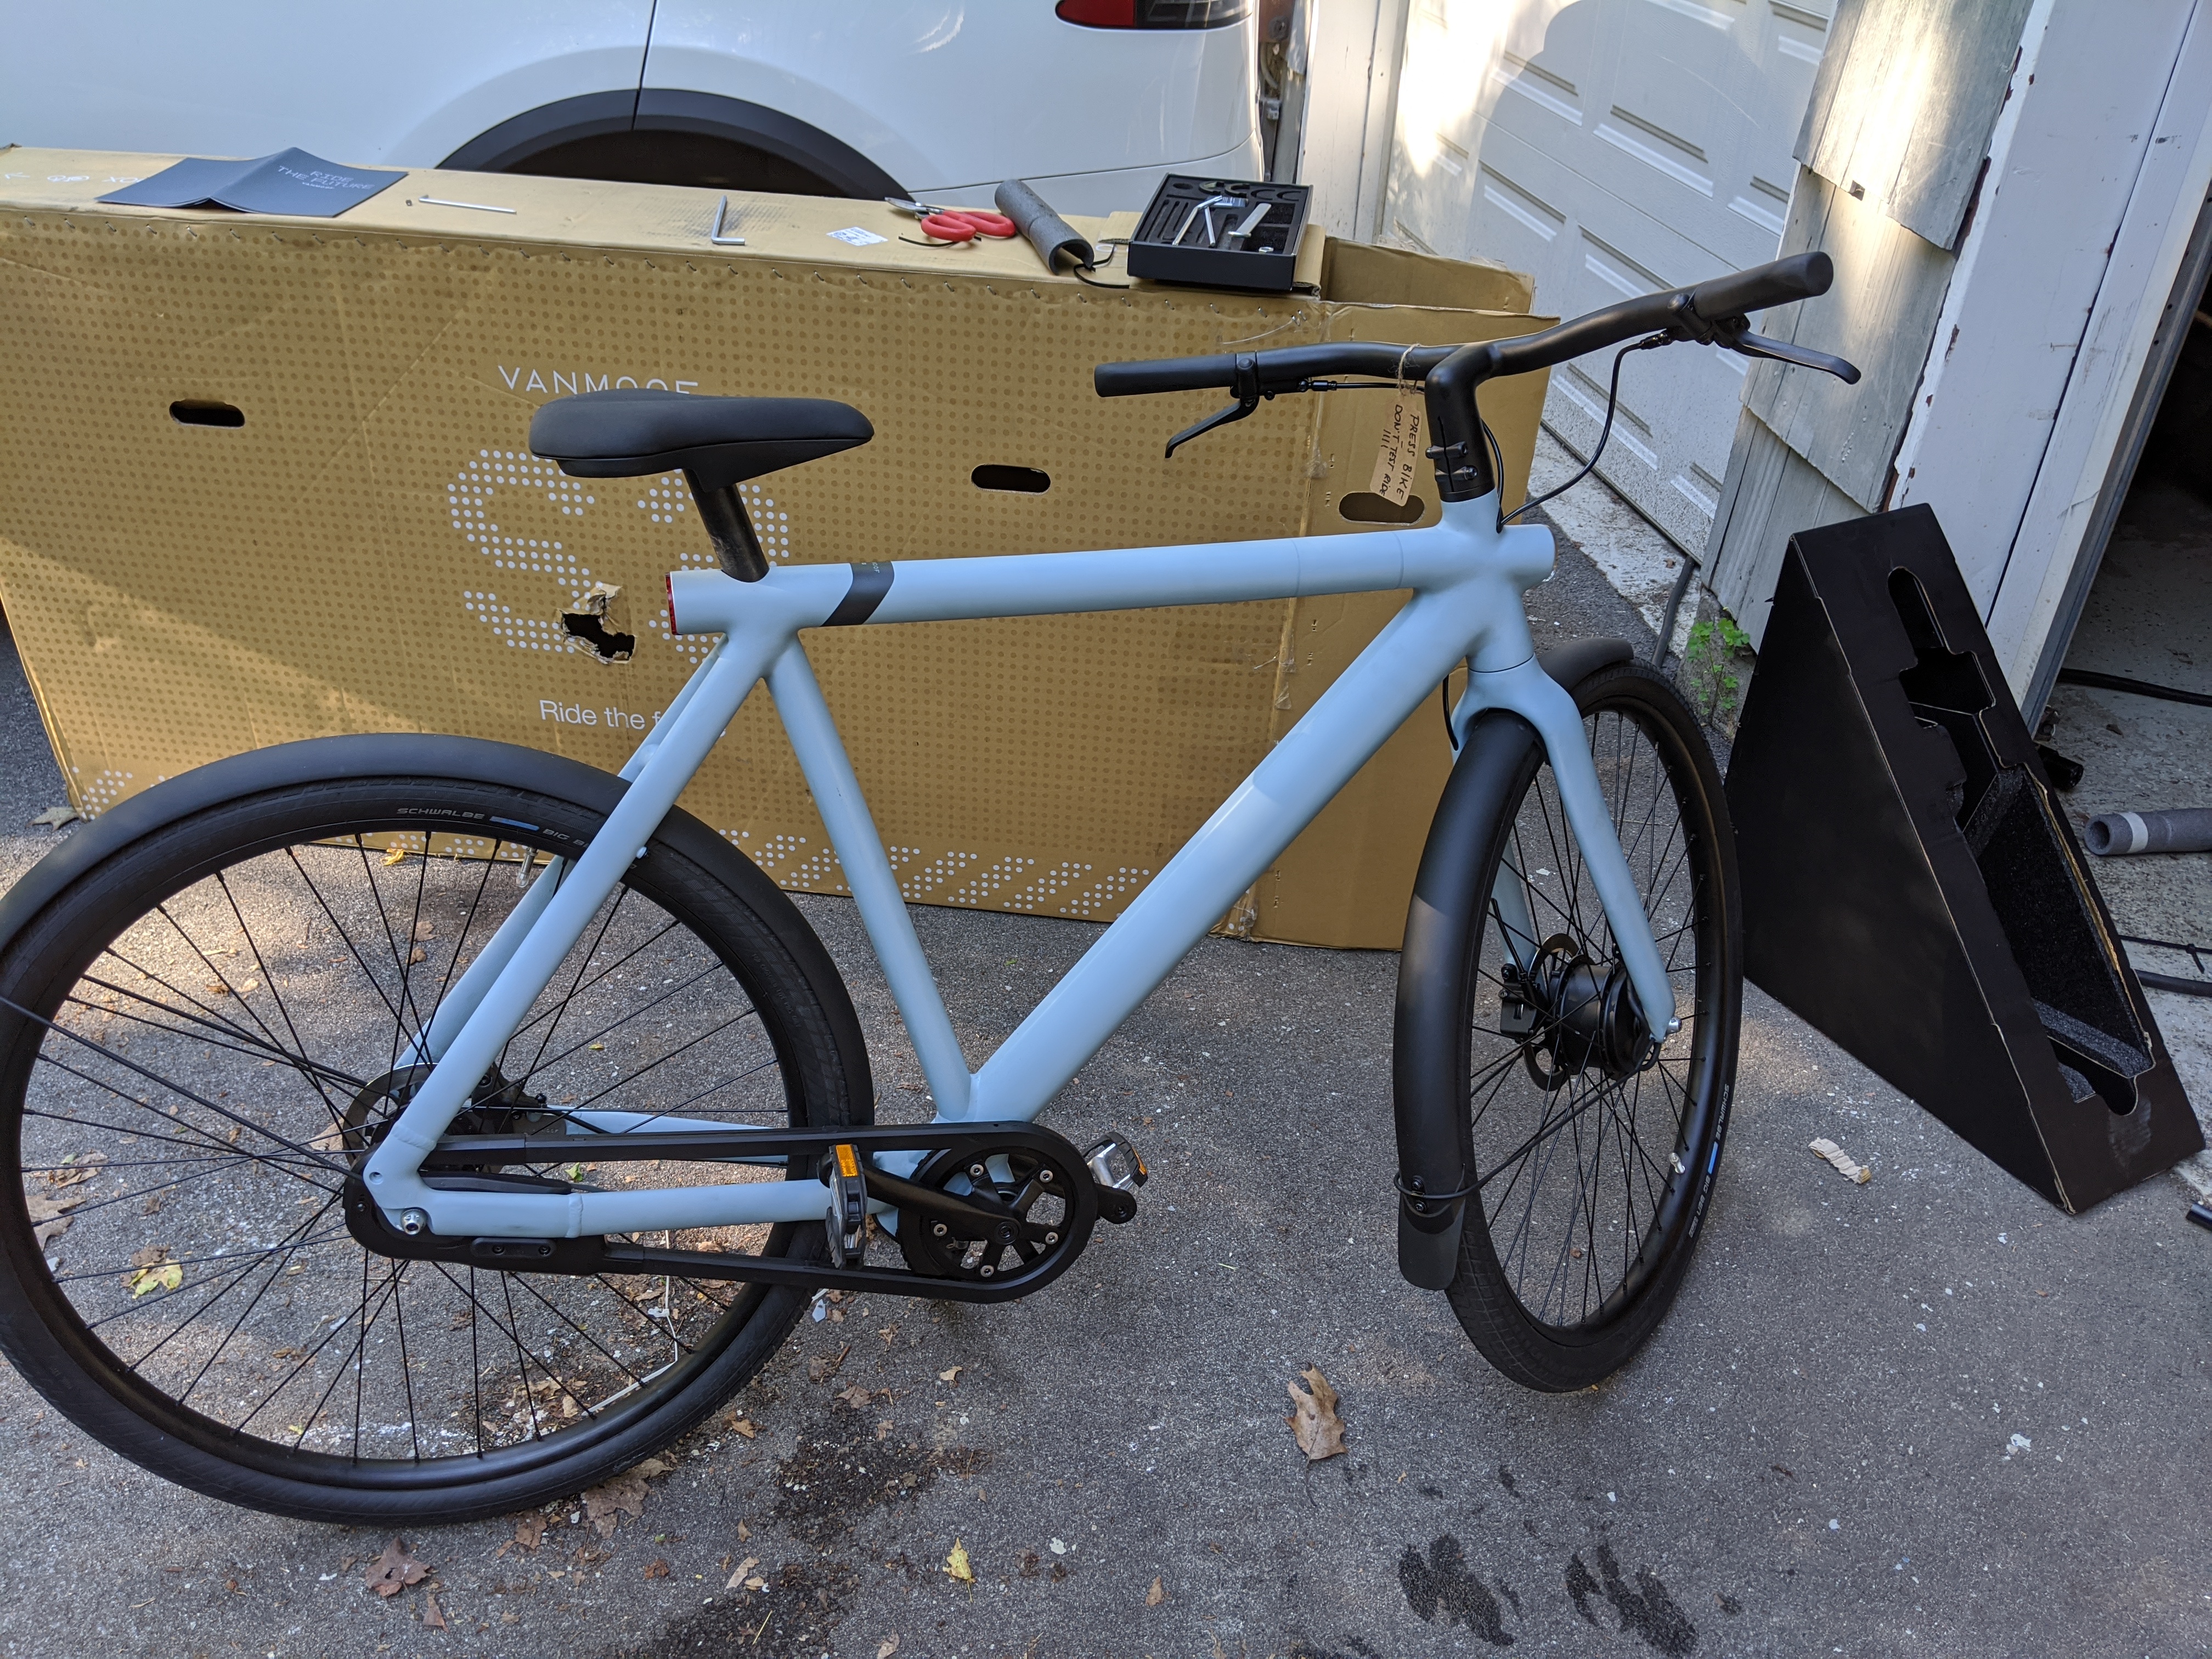 Review: VanMoof S3 is a technical marvel but not for everyone